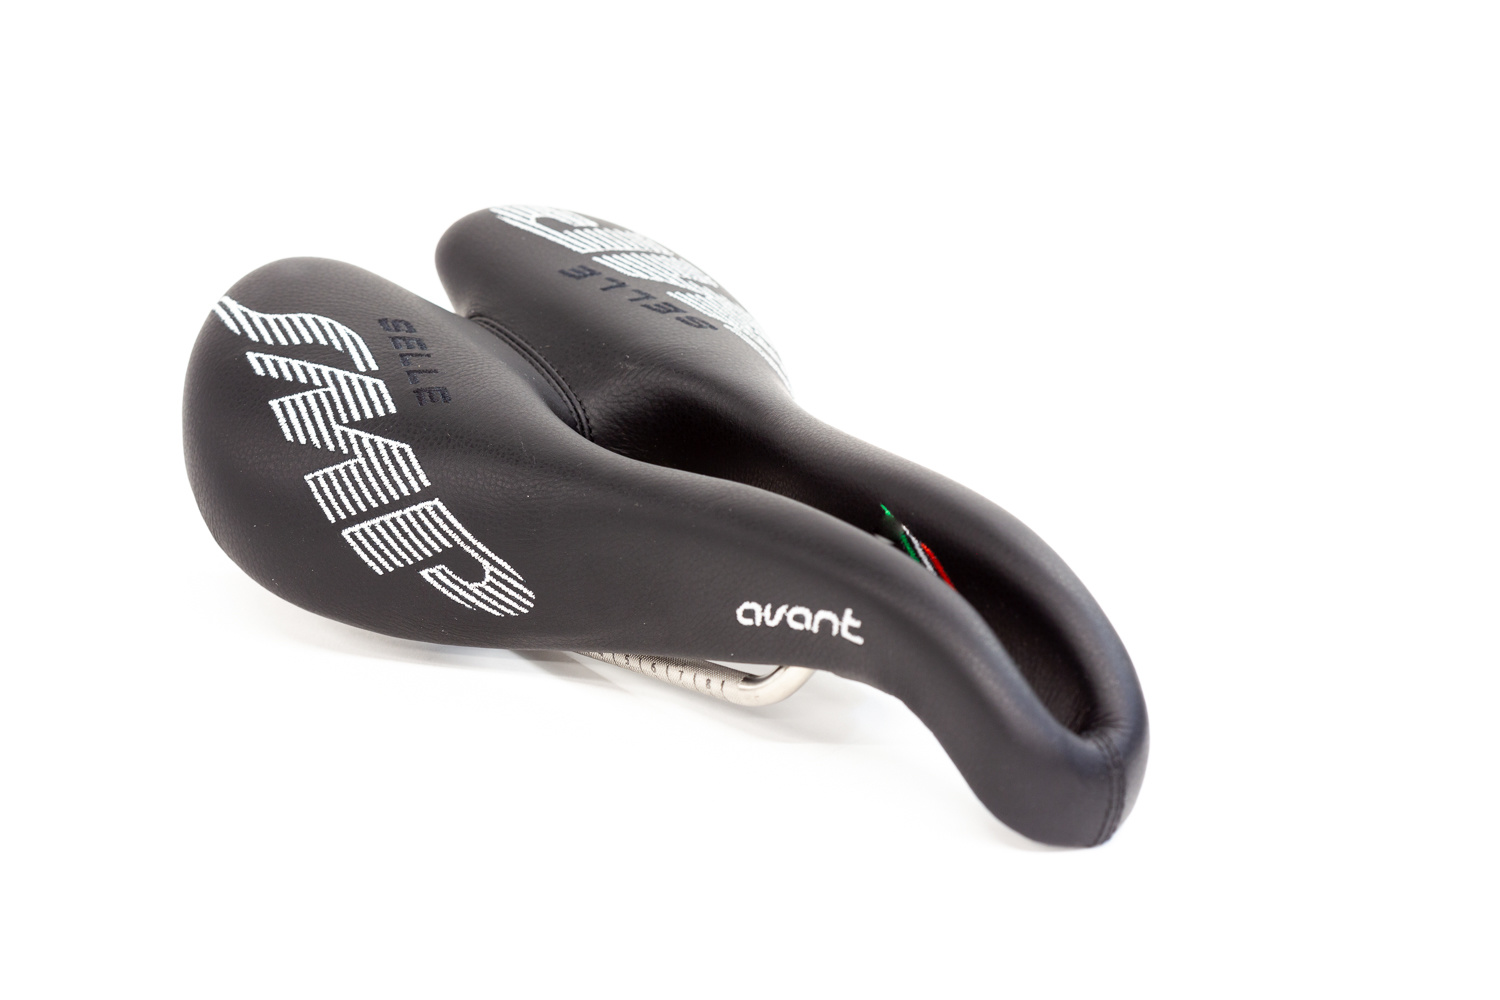 Selle SMP Saddle